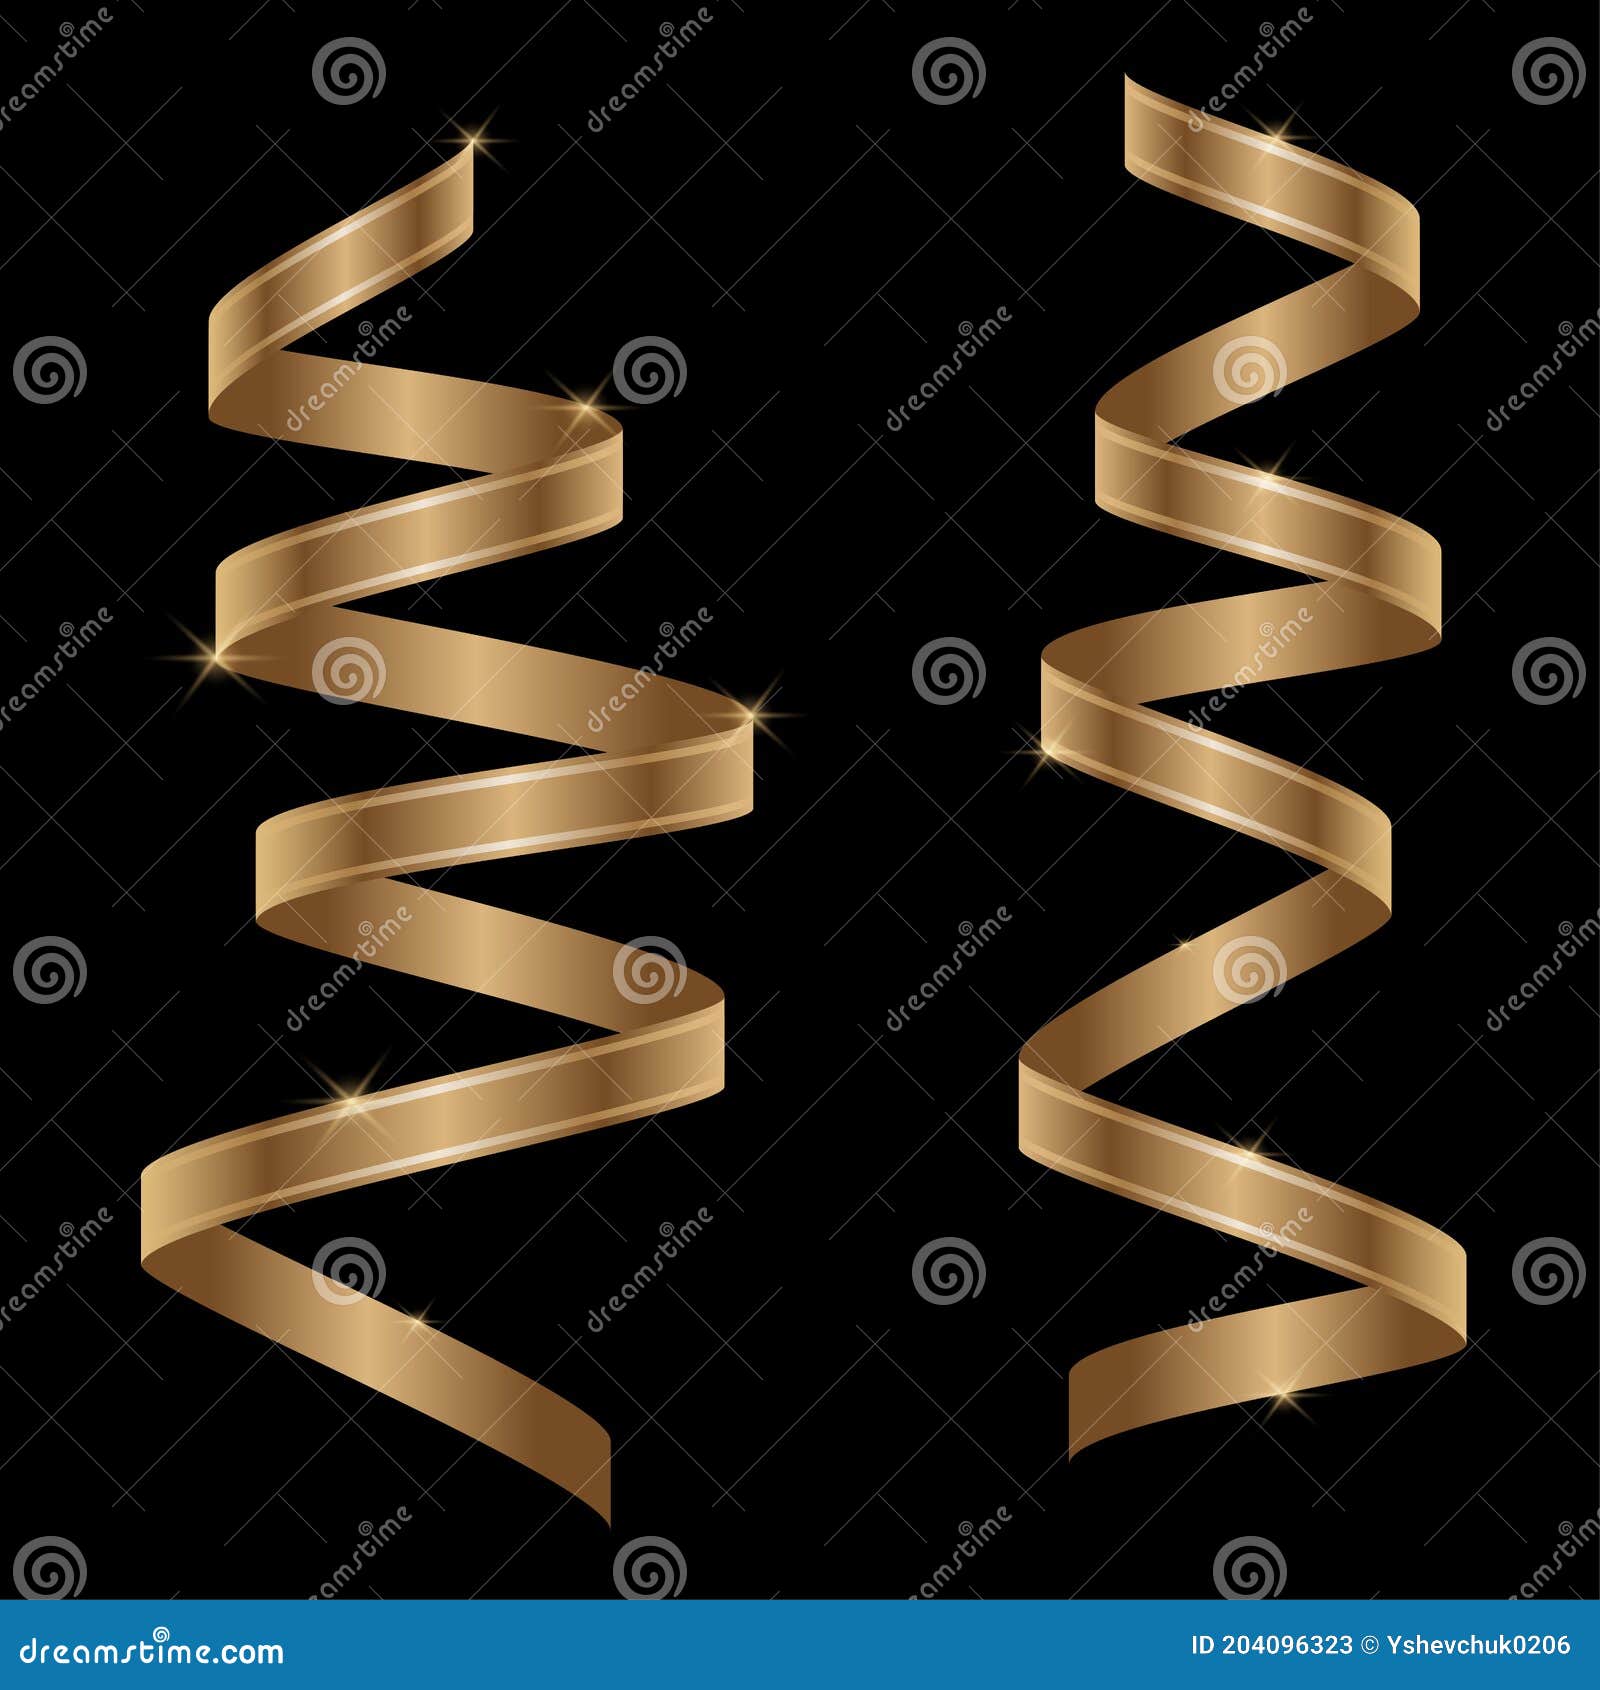 Gold curly ribbon serpentine confetti. Golden streamers set on